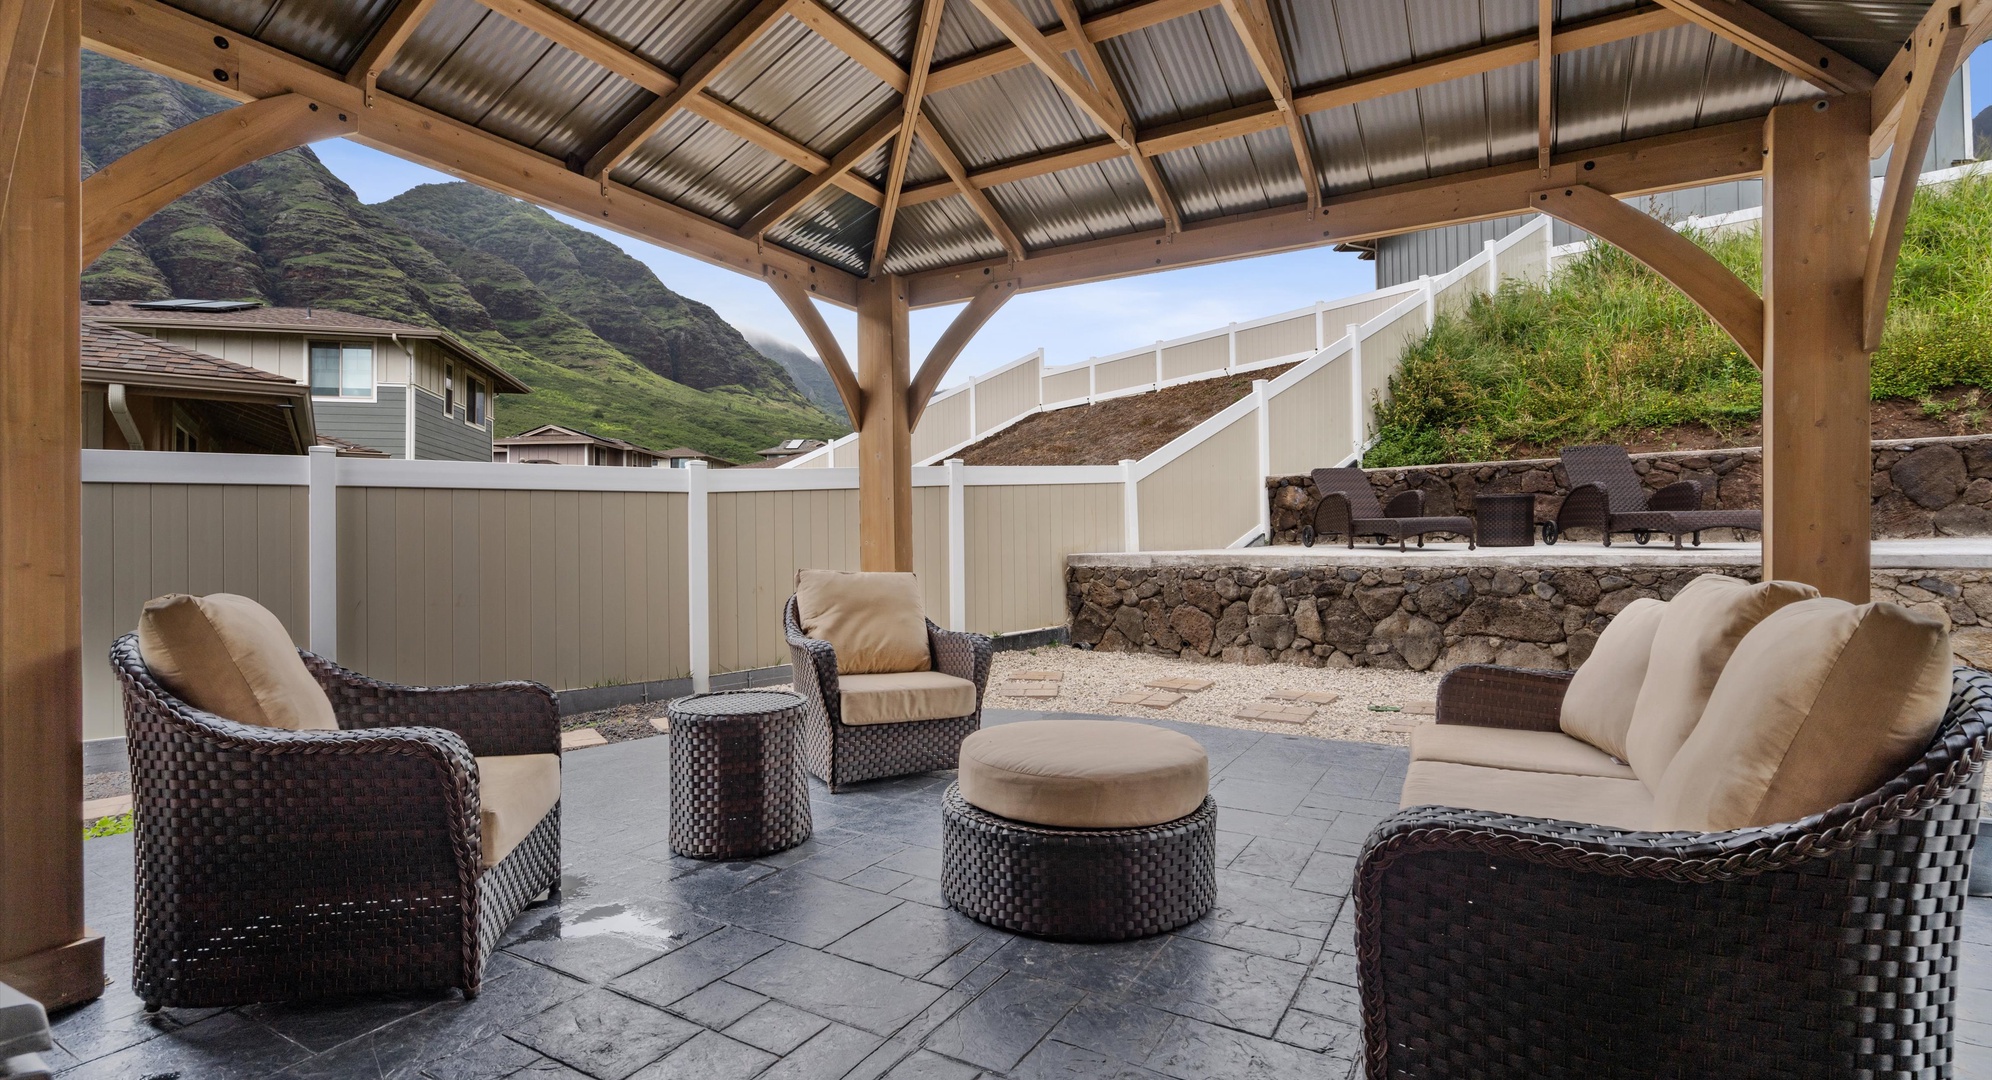 Waianae Vacation Rentals, Makaha Cottages Mauna Olu #76 - 3 - Gather around the gazebo area perfect for unwinding and enjoying the peaceful mountain backdrop.